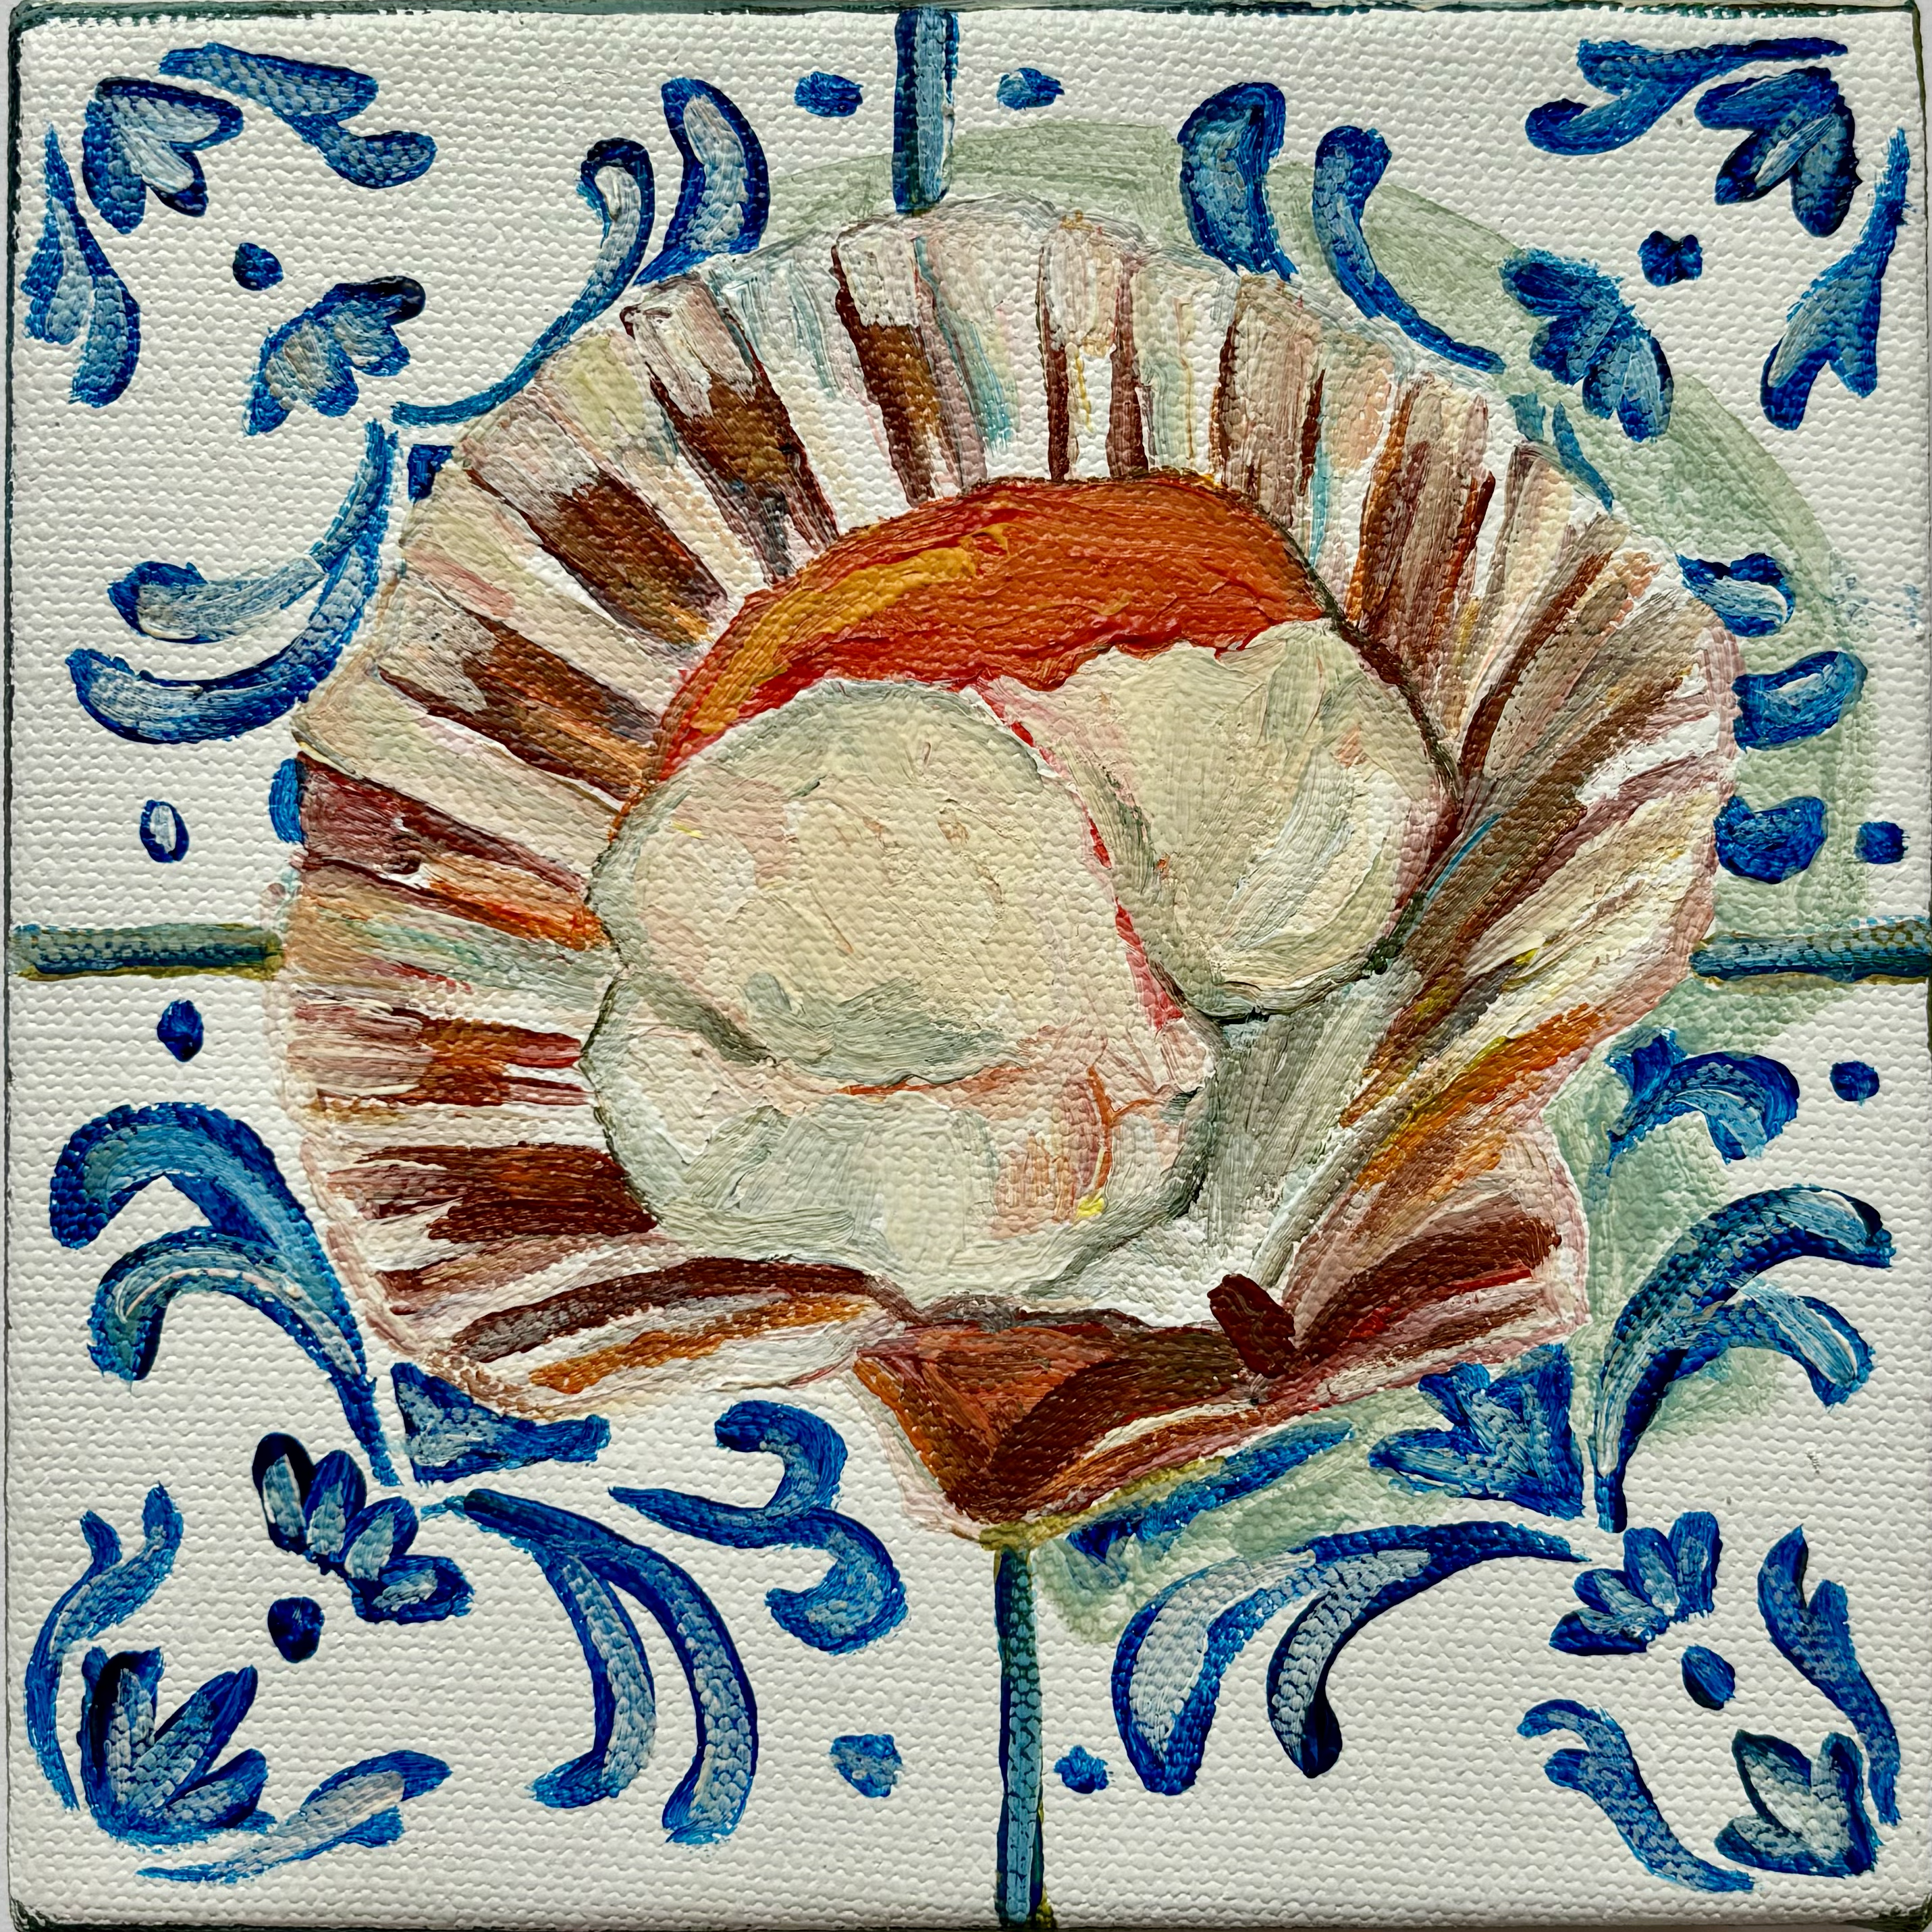 Scallop on Tiles by Pippa Smith